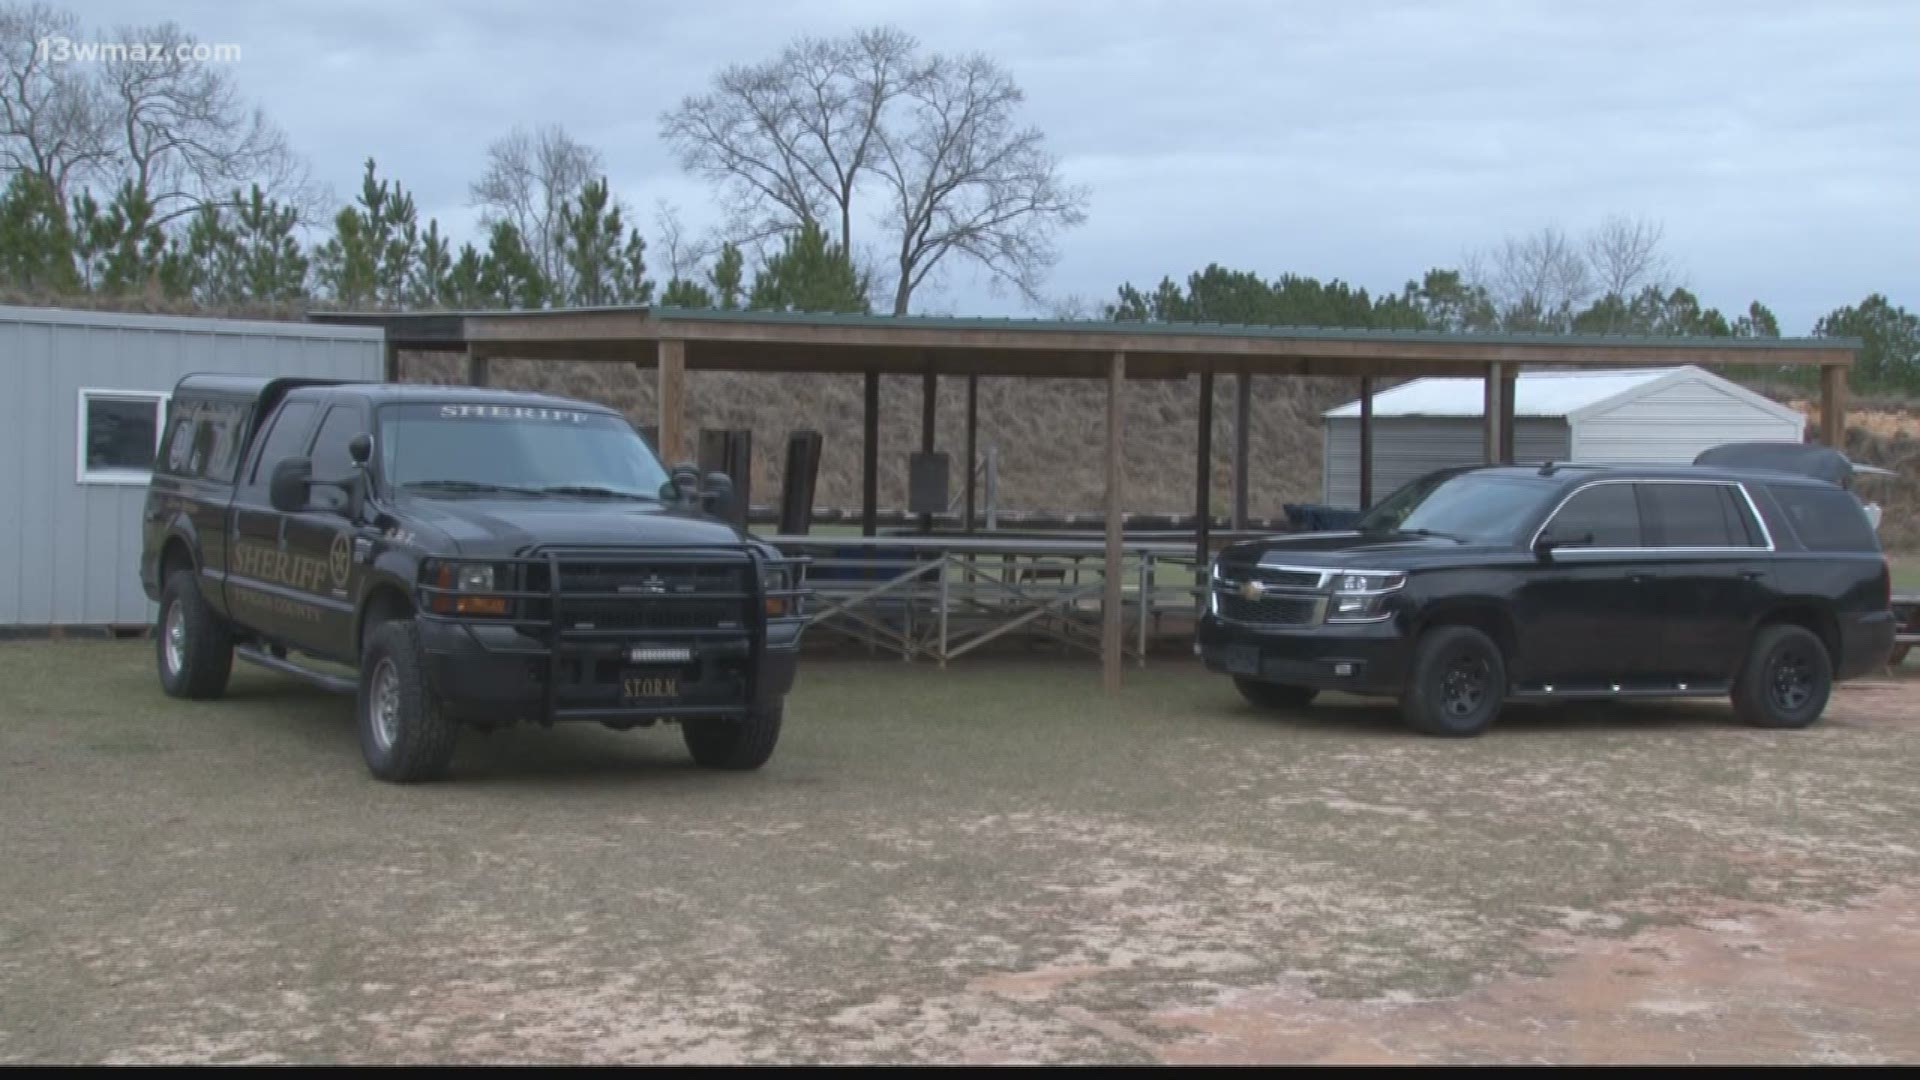 Twiggs County Sheriff's Office is getting a new training building with classrooms for deputies.